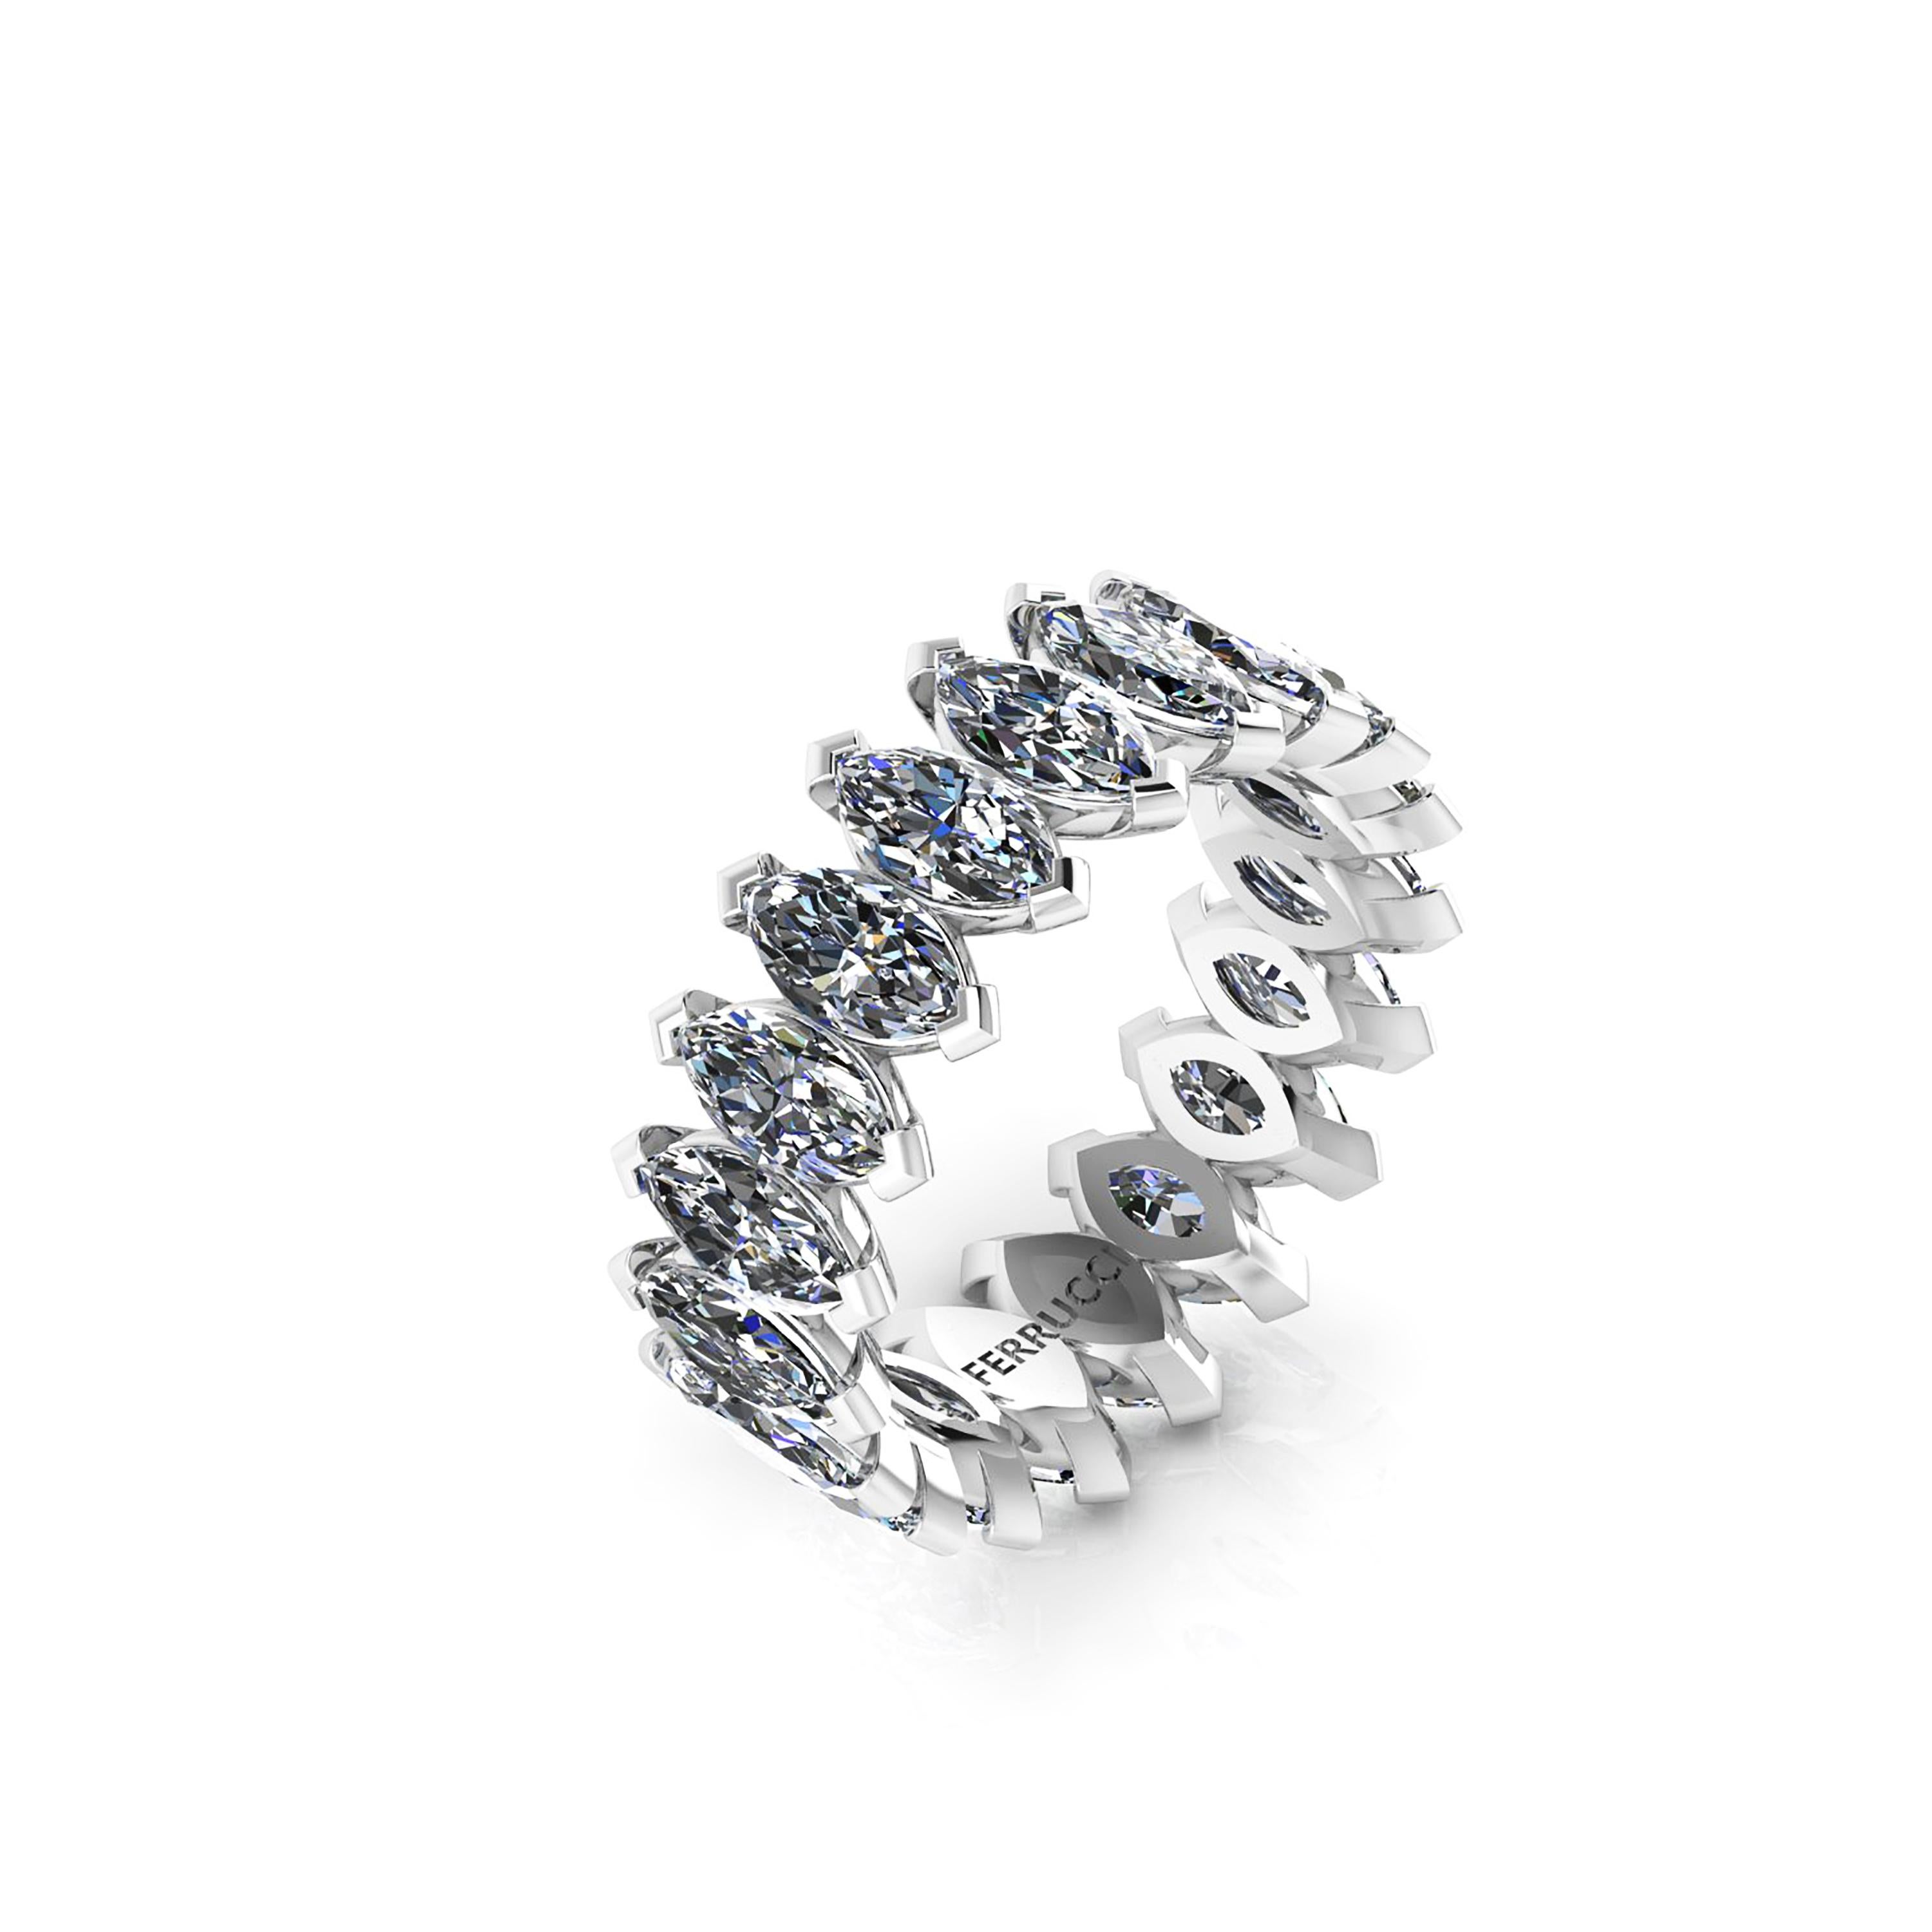 A classic FERRUCCI 4.70 carats of bright white diamonds G color, VS clarity, set to perfection in a hand crafted, Platinum 950 eternity band, 7 mm wide, stackable collection, made in New York with the best Italian craftsmanship, size 6,